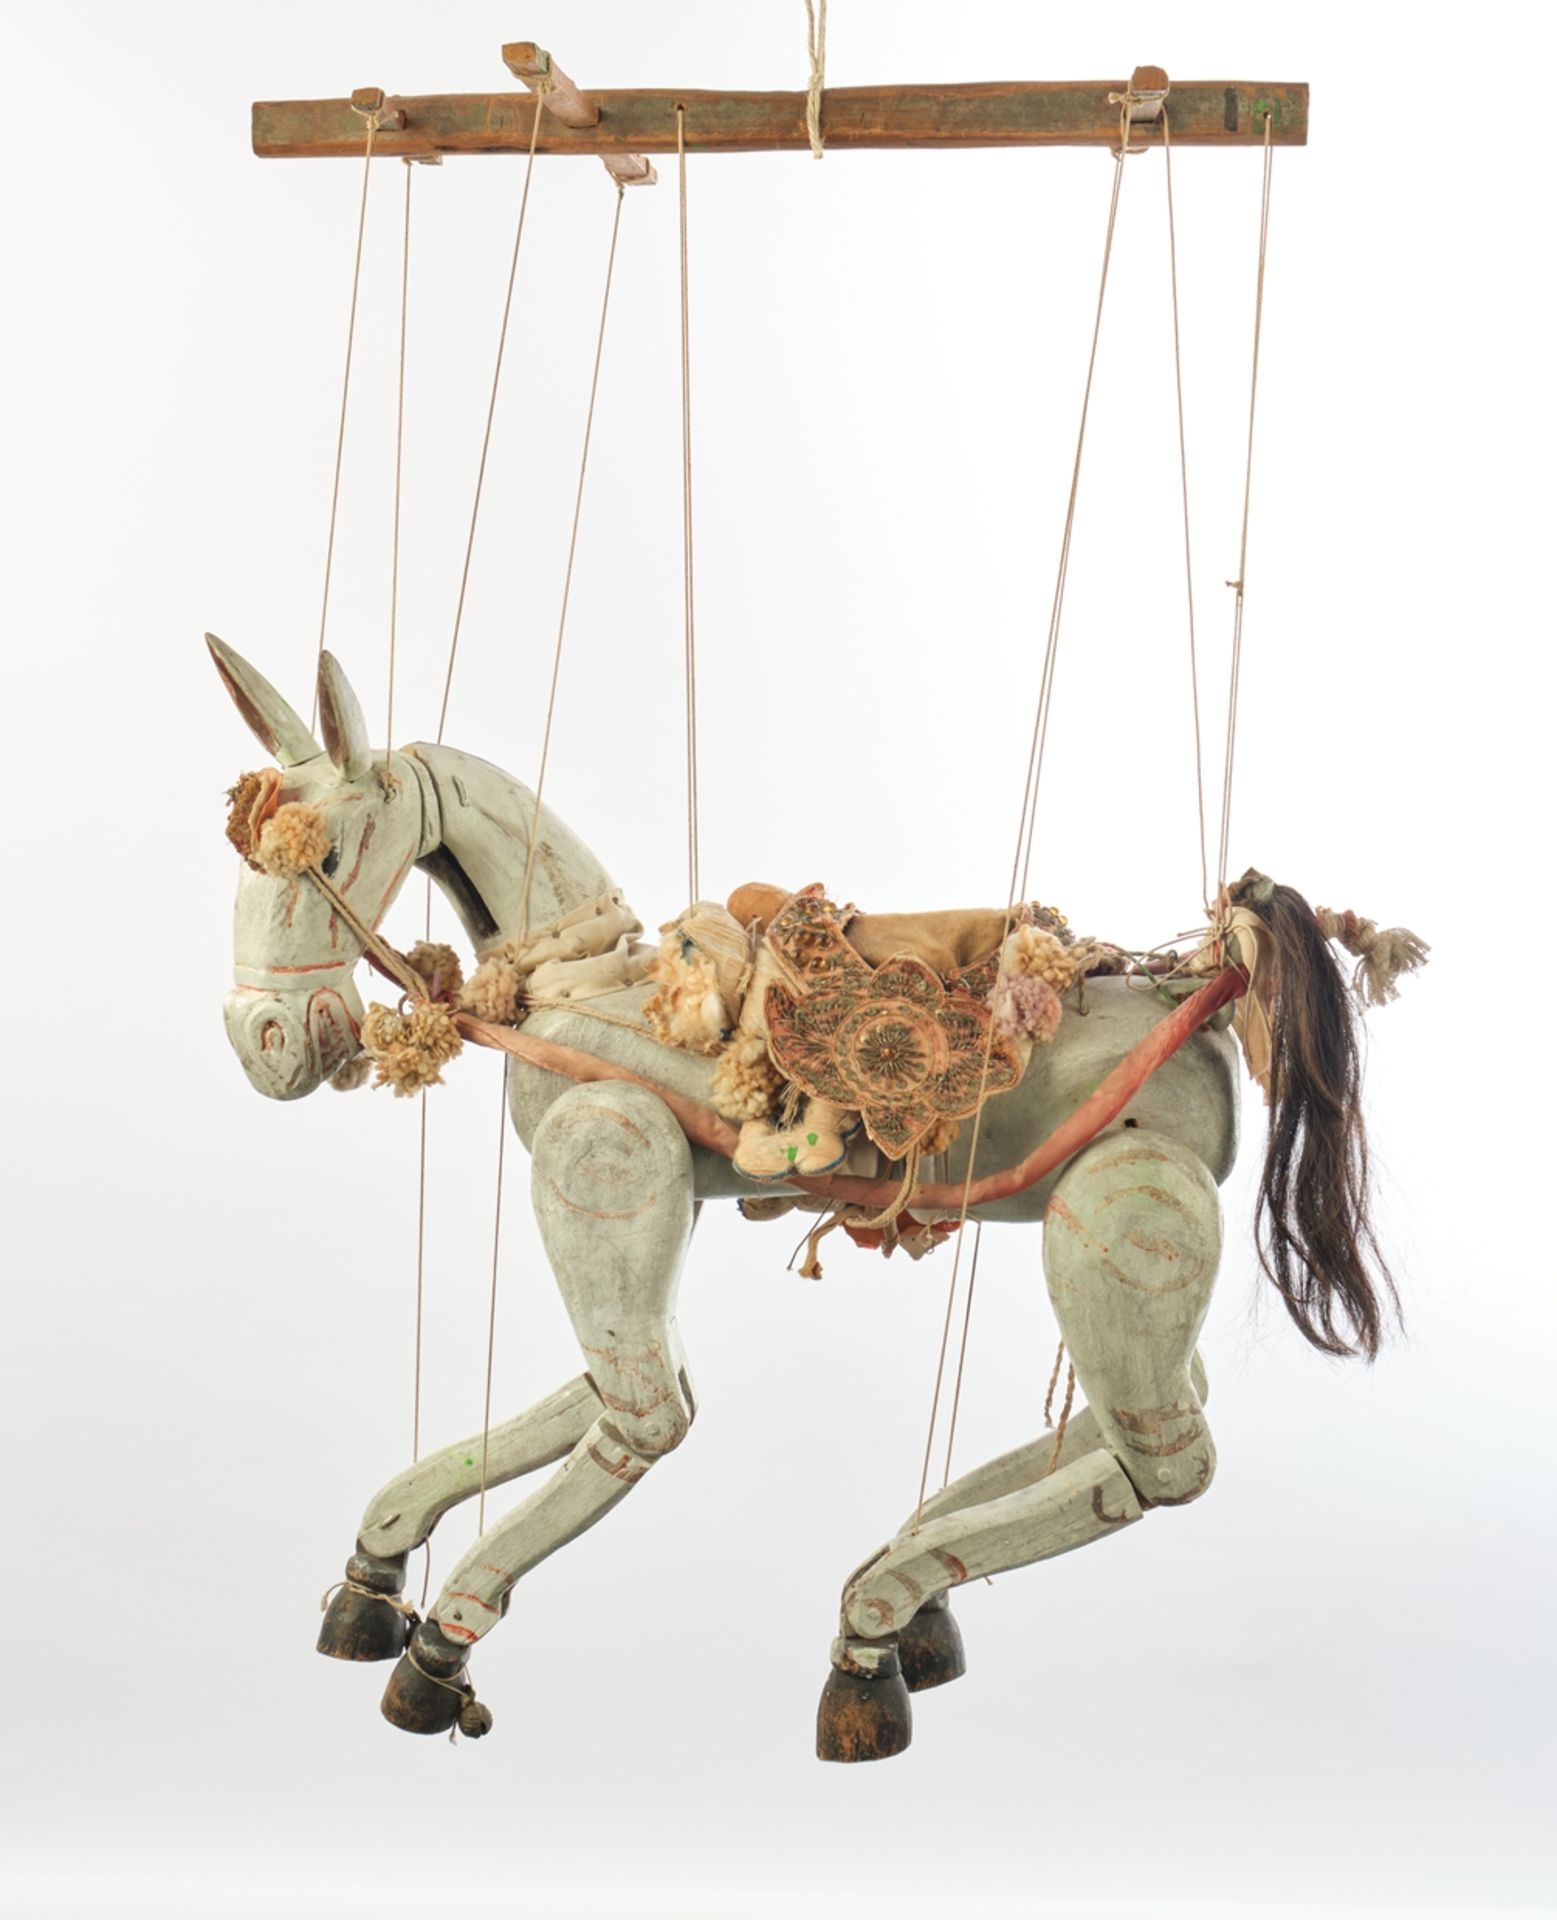 Marionette,,"Horse", Burma, 2nd half 20th century, wood, painted, fabric saddle, embroidered with b